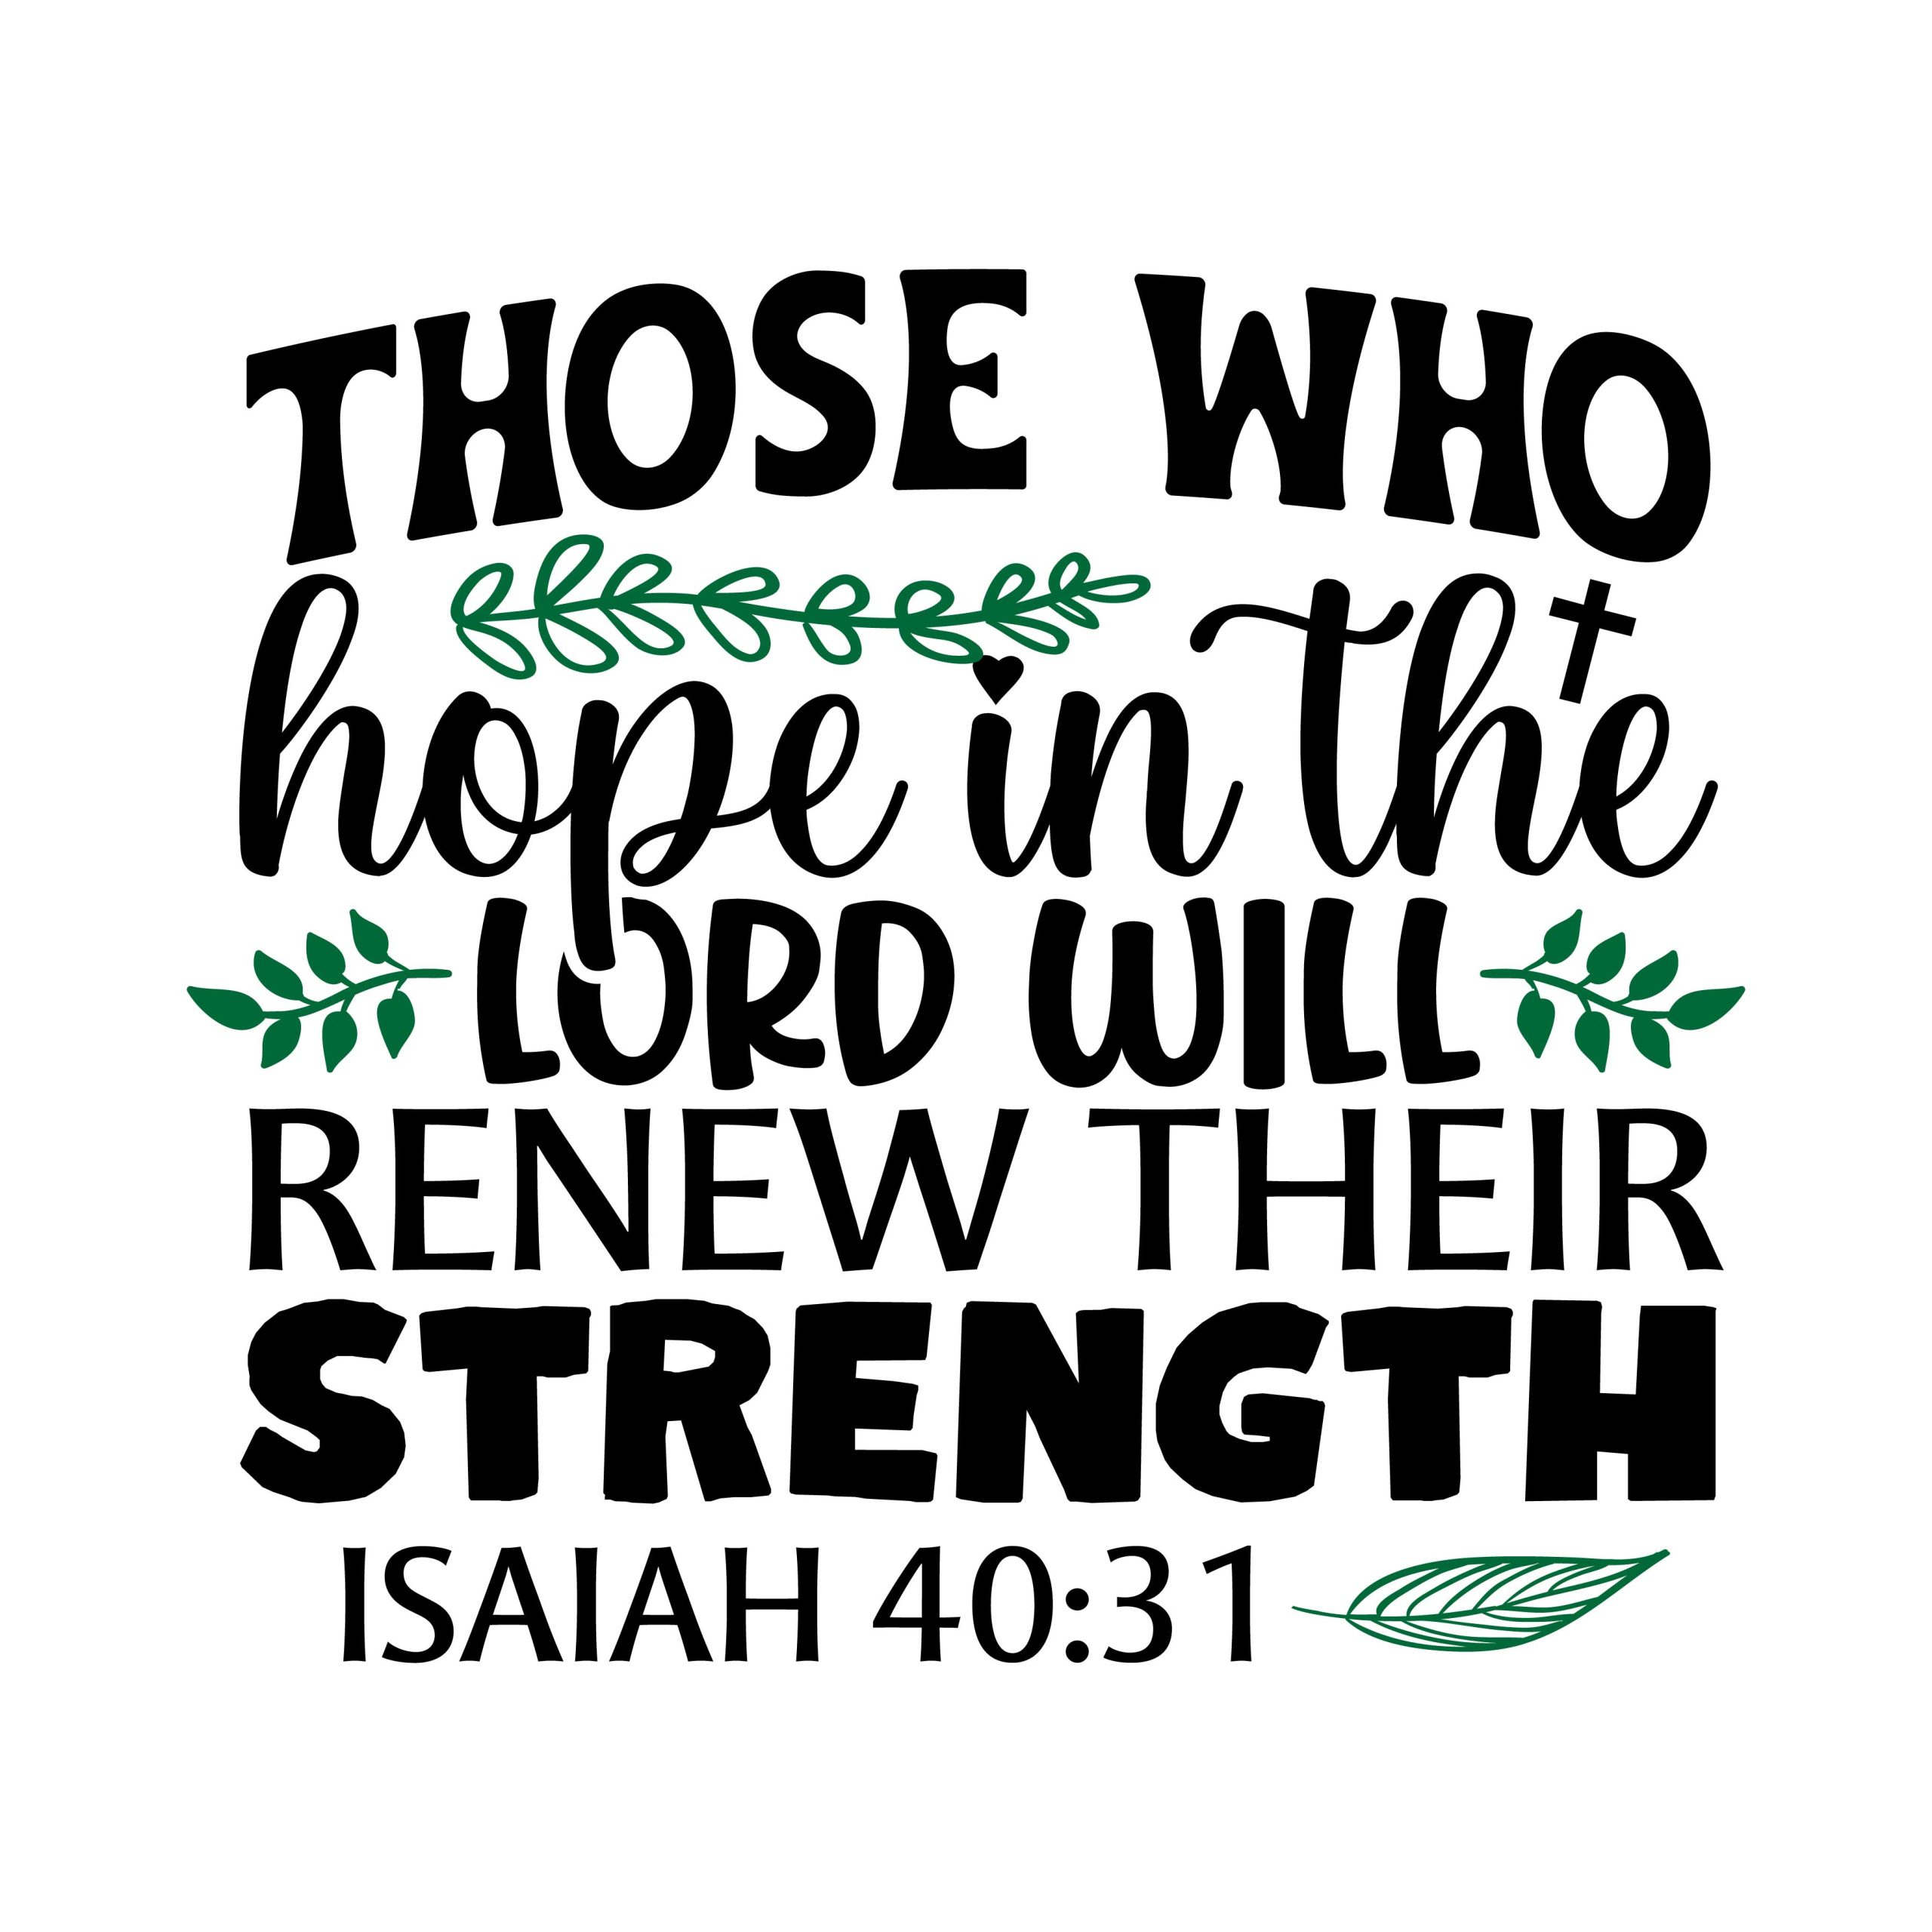 Those who hope in the lord will renew their strength Isaiah 40:31, bible verses, scripture verses, svg files, passages, sayings, cricut designs, silhouette, embroidery, bundle, free cut files, design space, vector